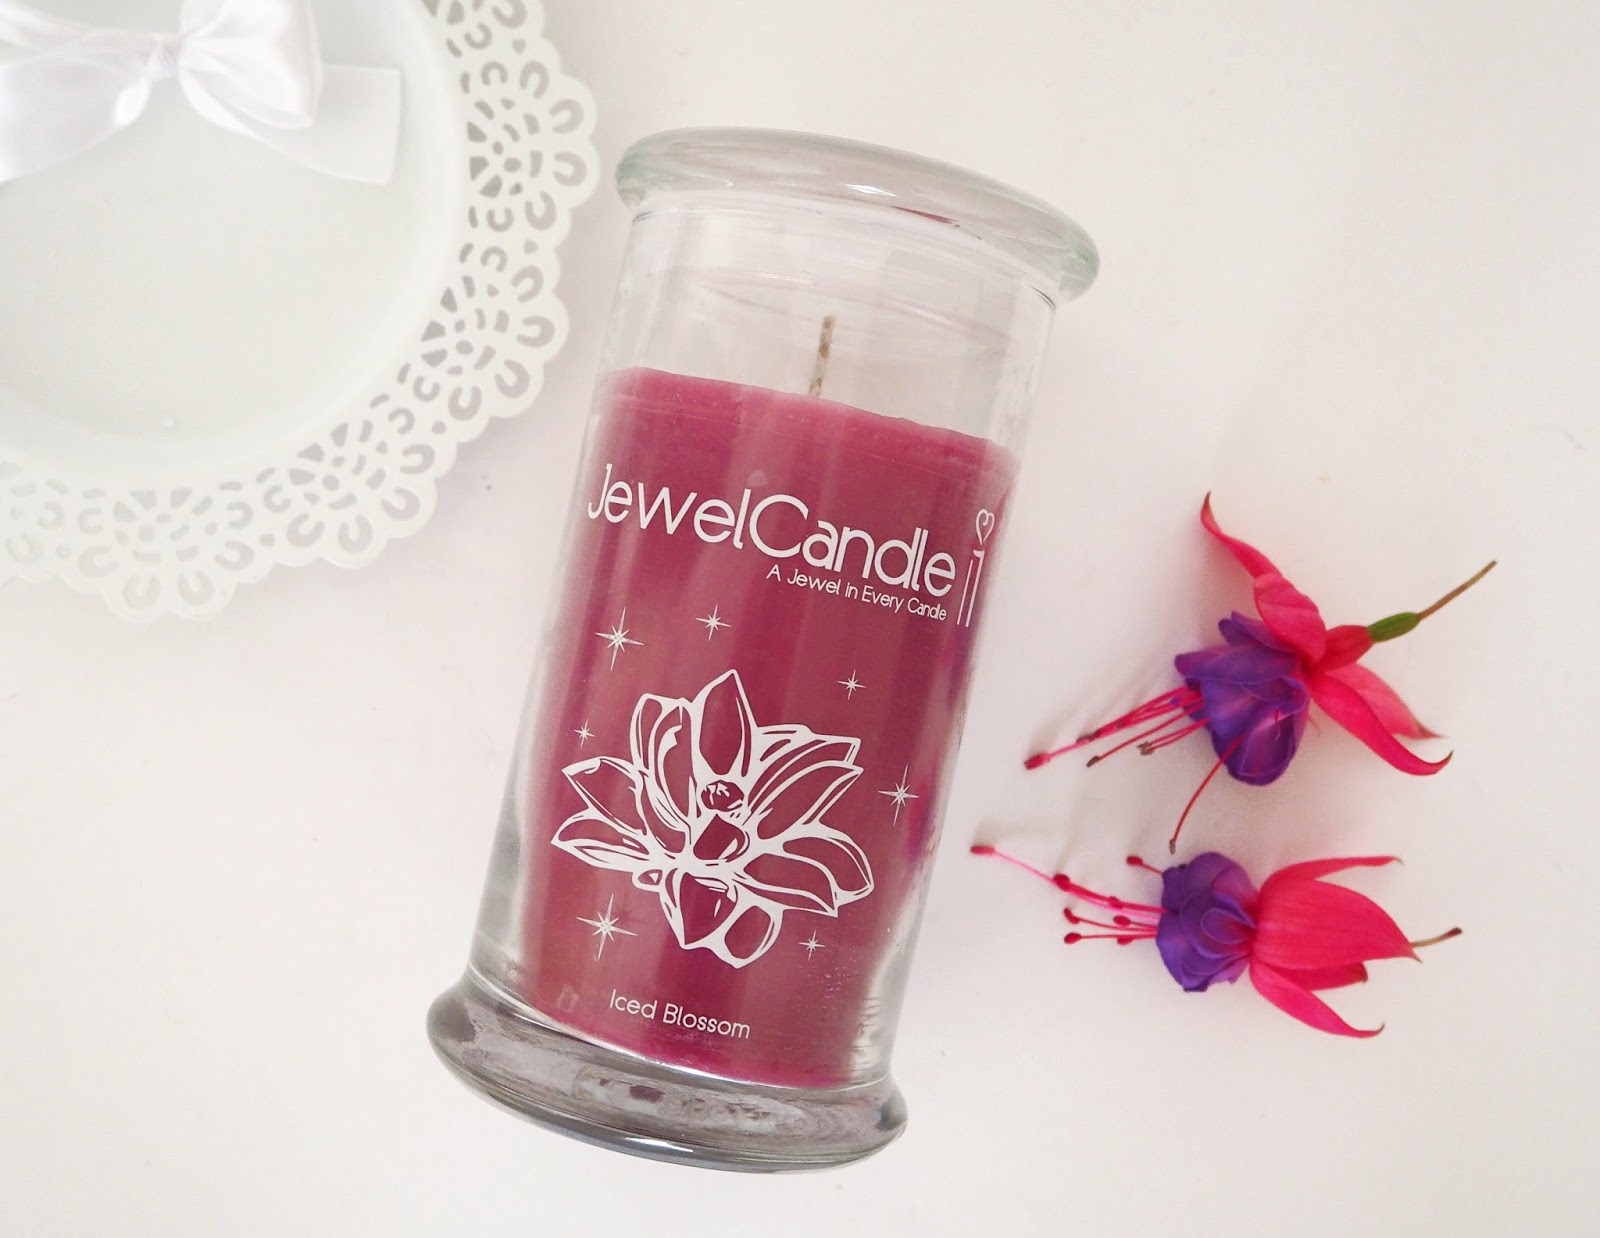 Jewel Candle Review & Giveaway, Katie Kirk Loves, Candle Review, Fragranced Candles, Scented Candles, Lifestyle Blogger, Candle Blogger, Jewellery Inside a Candle